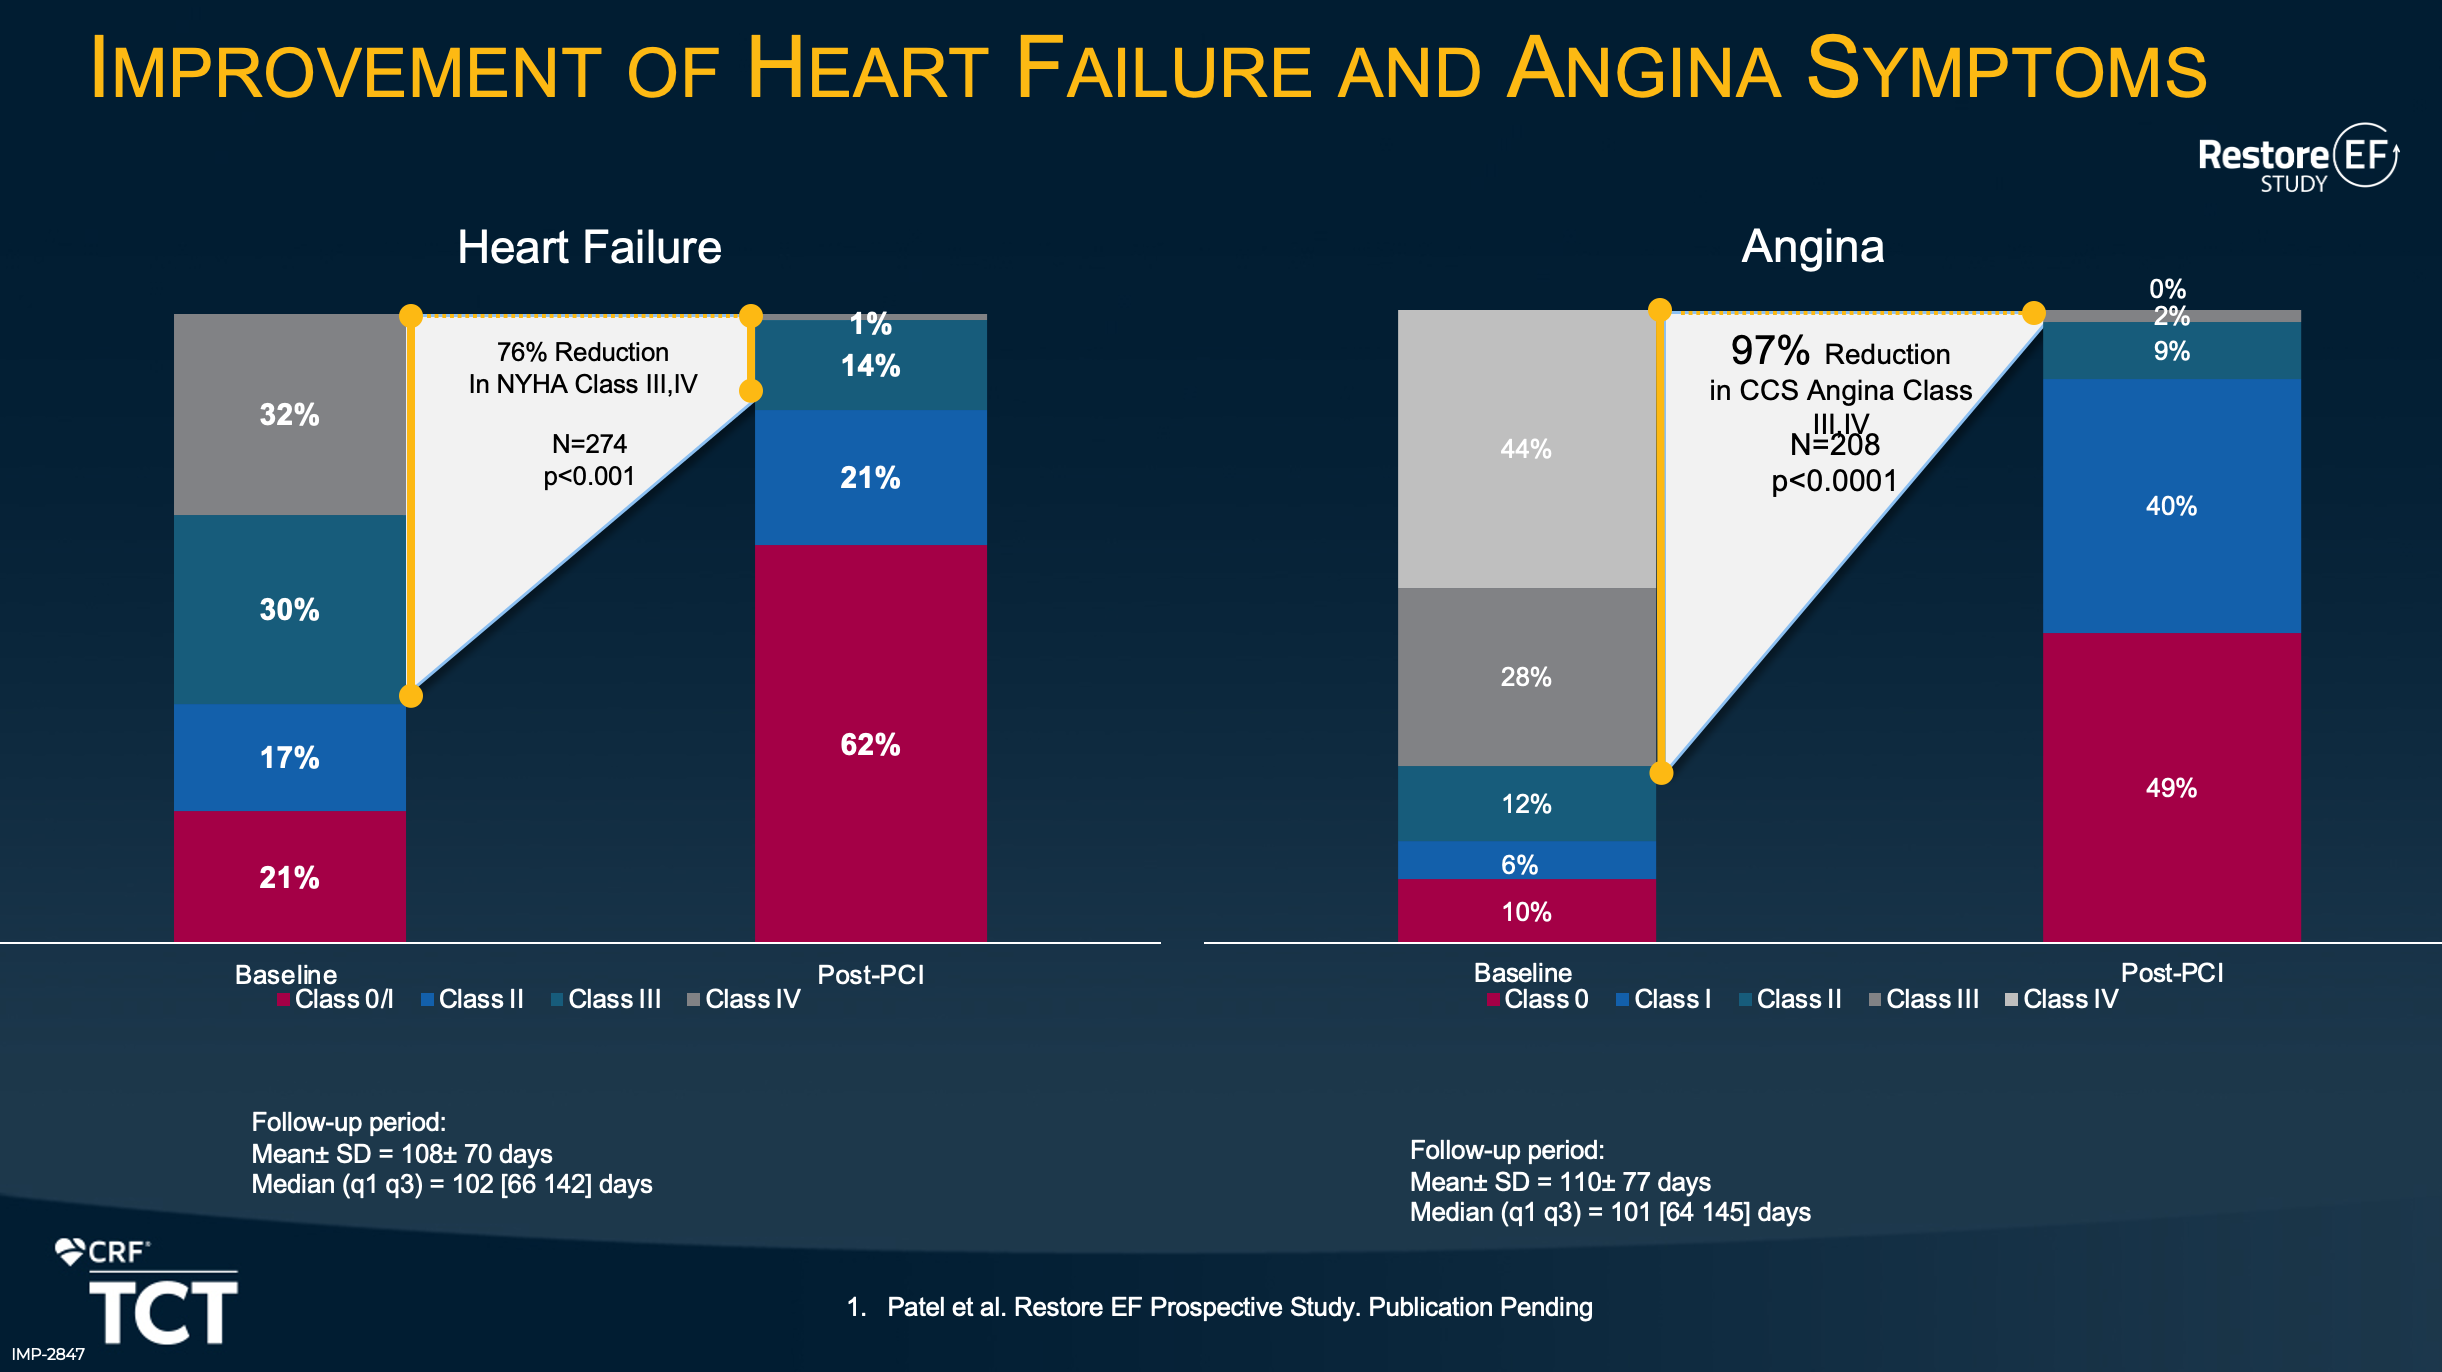 TCT 2021 slide showing Improvement of Heart Failure and Angina Symptoms